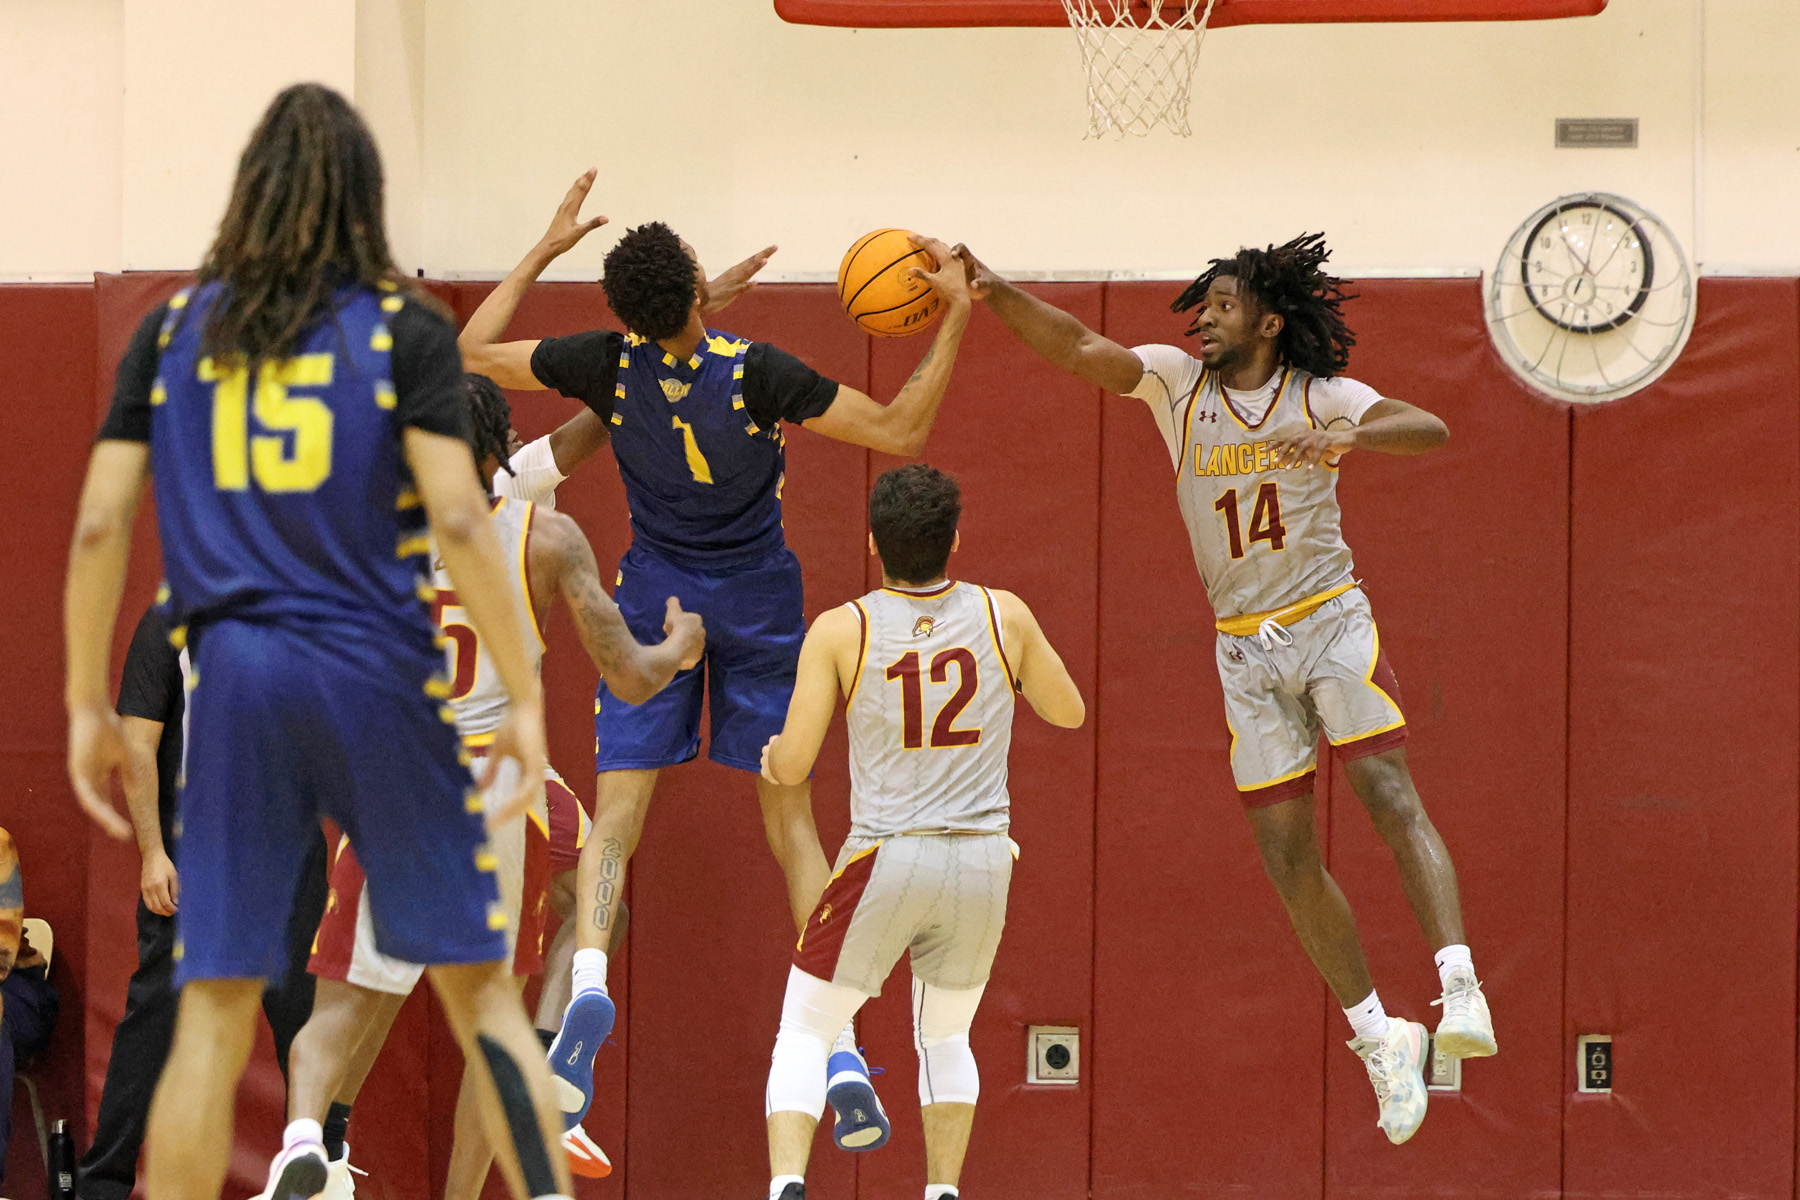 Deen Abdur-Rahmann makes the defensive play in PCC's playoff win on Wednesday (photo by Richard Quinton).